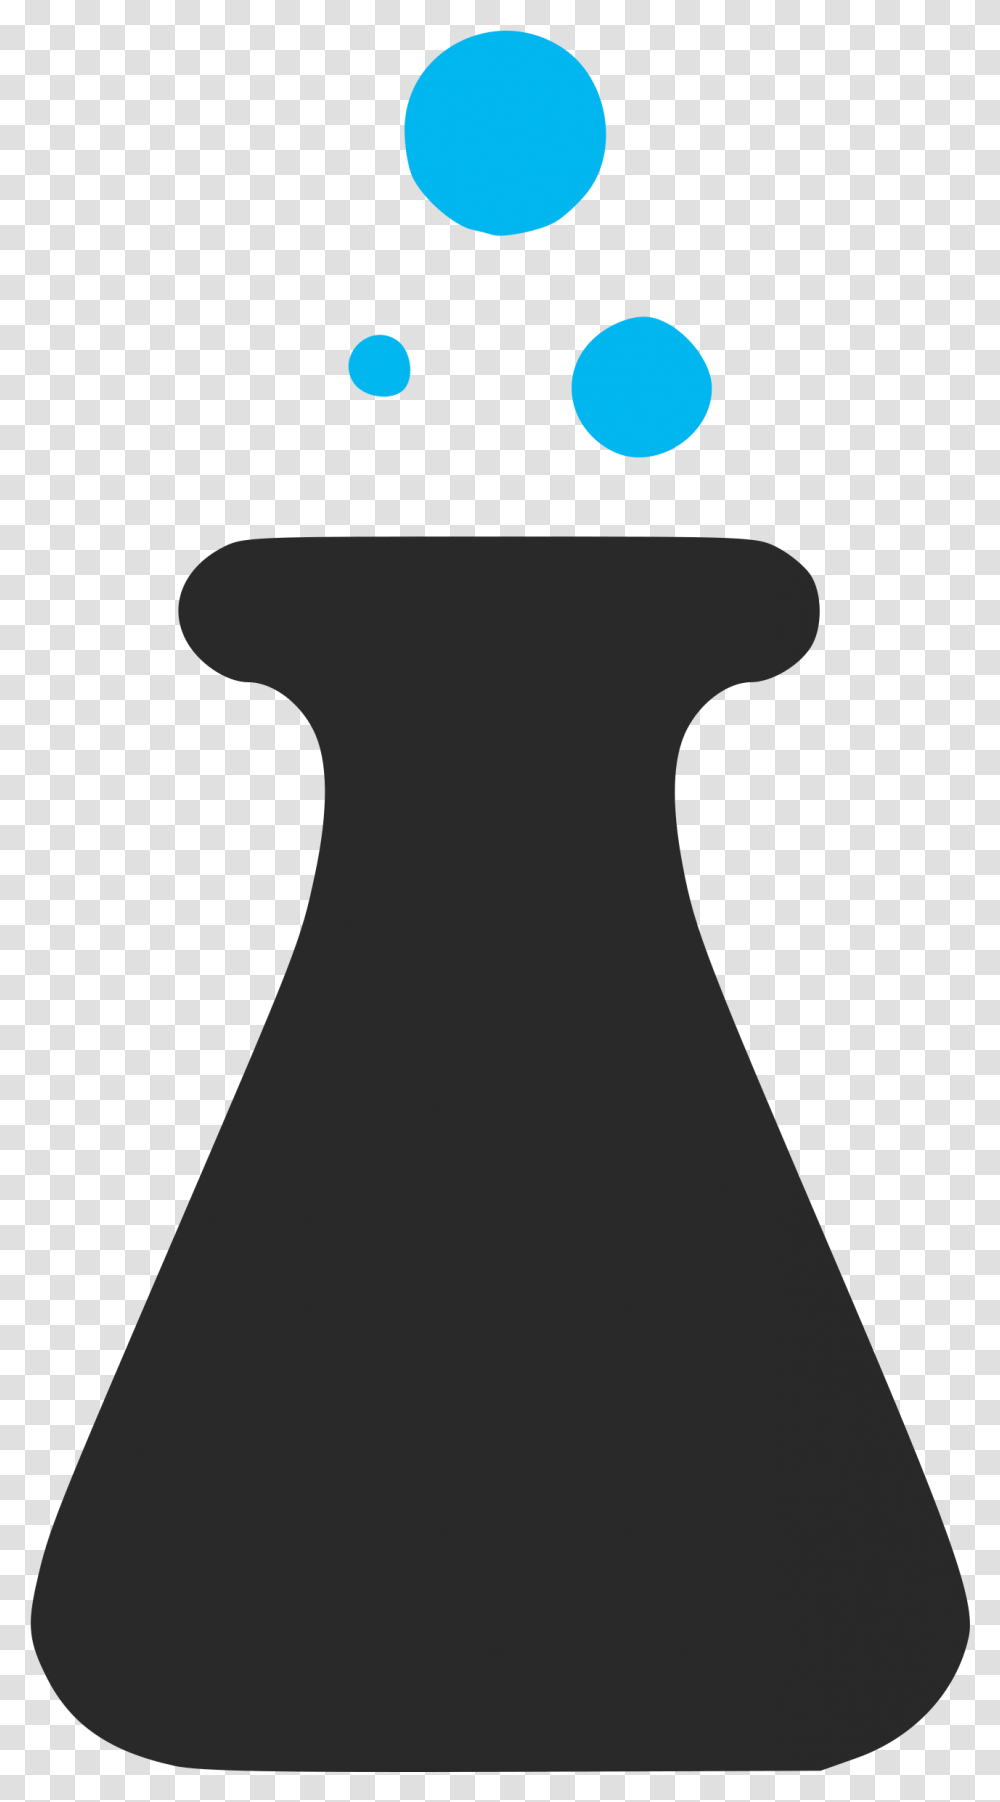 Erlenmeyer Flask, Silhouette, Leisure Activities, Hand, Dance Pose Transparent Png